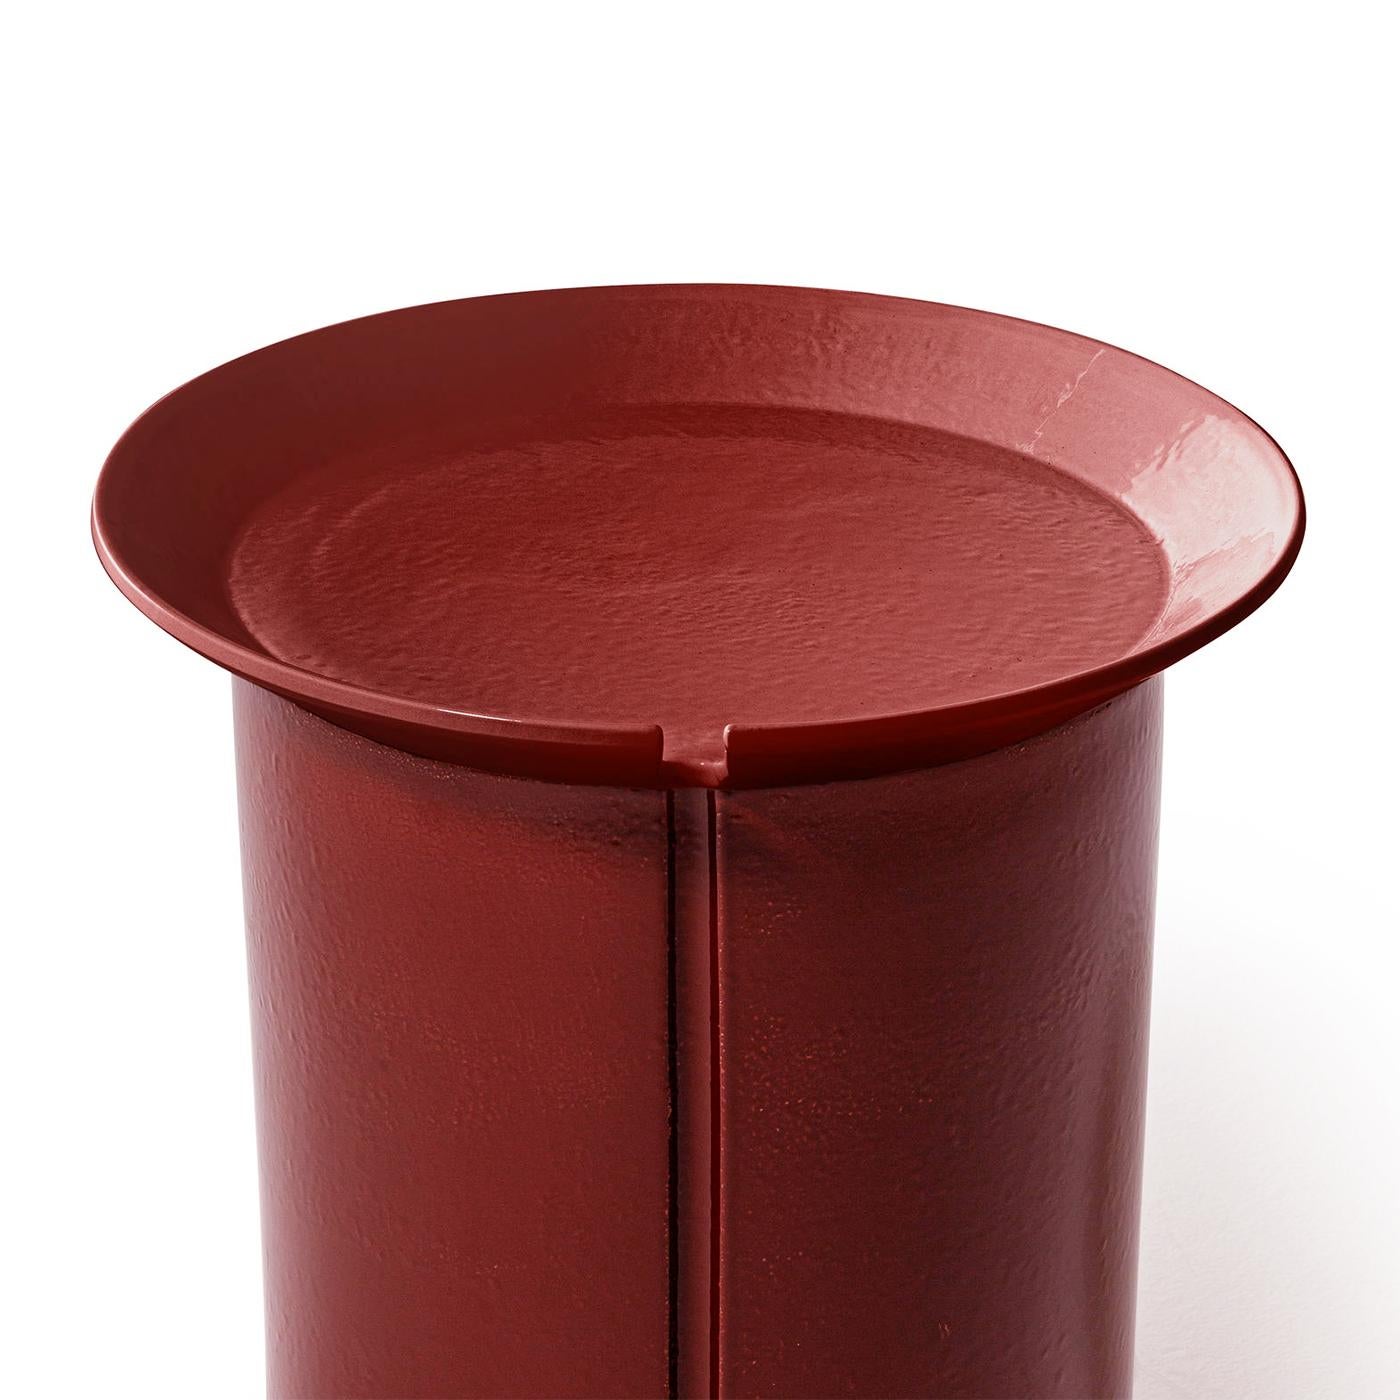 Side table ellaby red medium all in.
Hand-crafted ceramic in red finish.